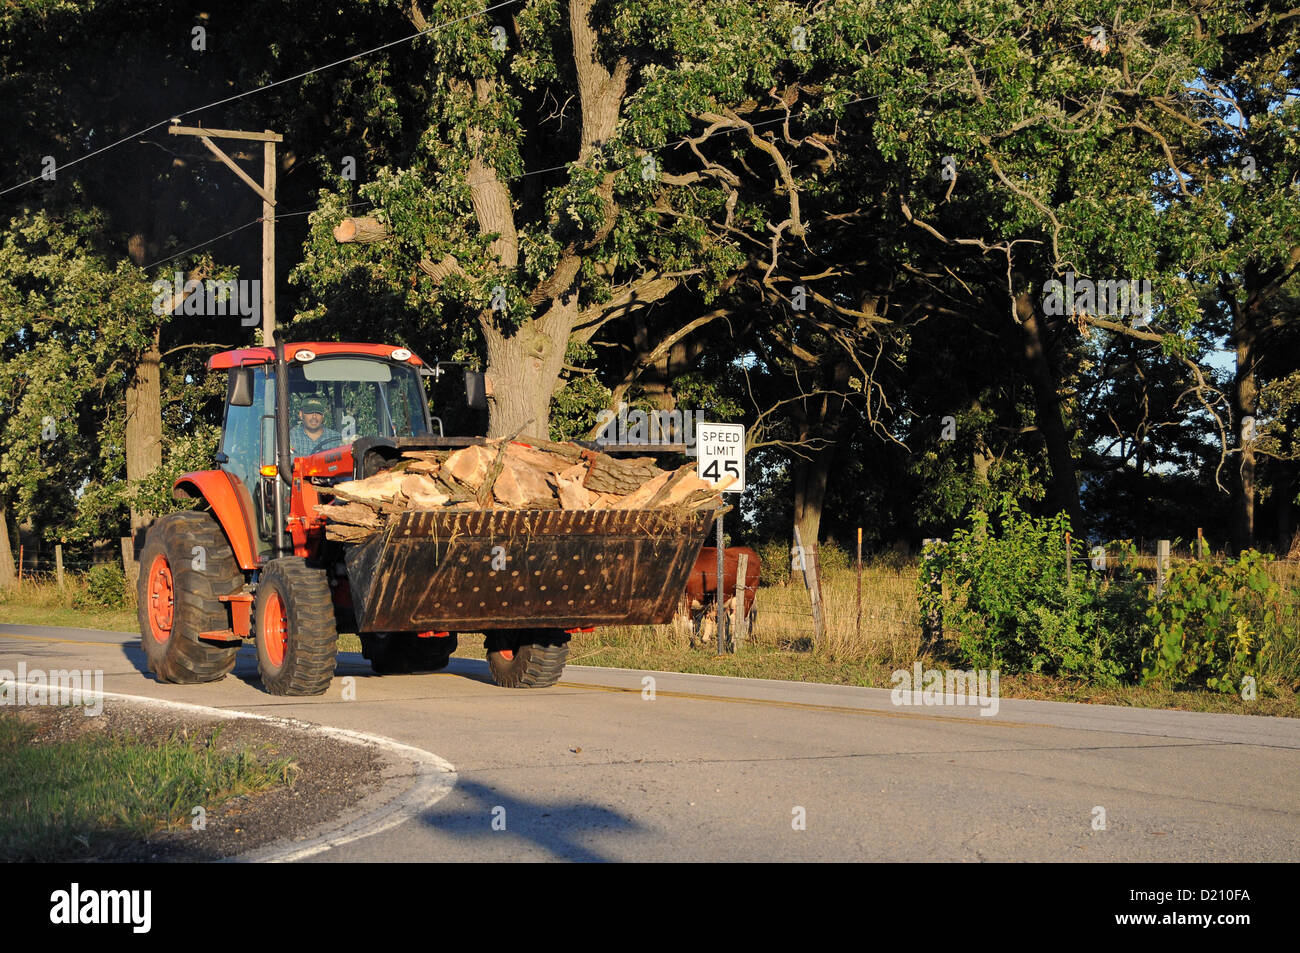 Tractor farmer moves wood slowly down a rural highway in Illinois farm country. USA. Stock Photo